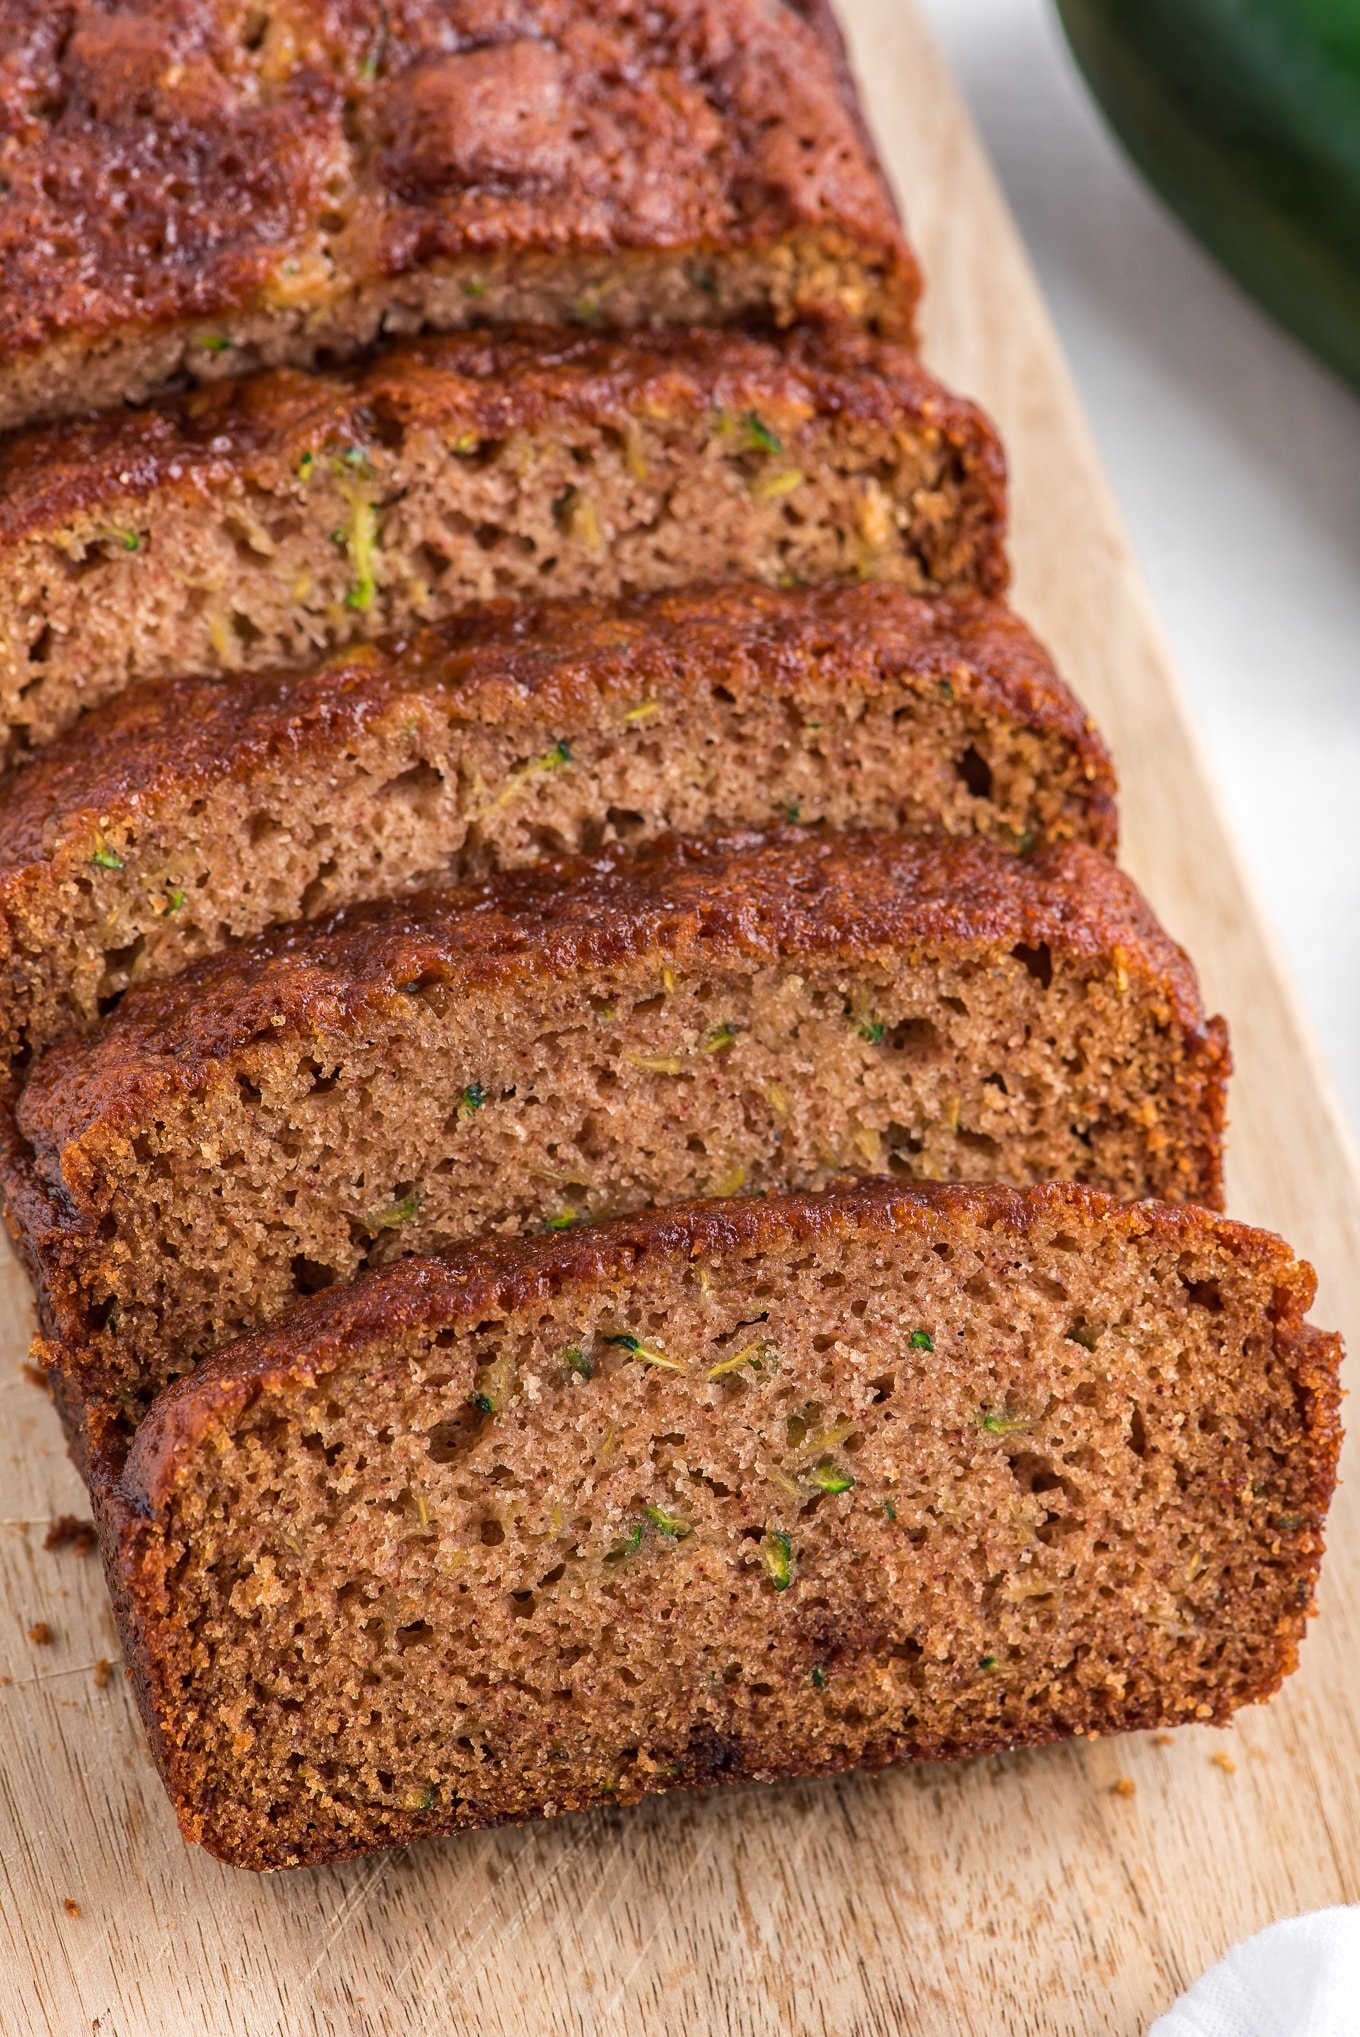 sliced zucchini bread on a wood cutting board. / This zucchini bread is a quick bread recipe that is made with grated zucchini, flour, sugar, eggs, applesauce, orange juice, and cinnamon. It has a moist and tender texture with a slightly sweet flavor perfect for breakfast or even a healthier dessert.